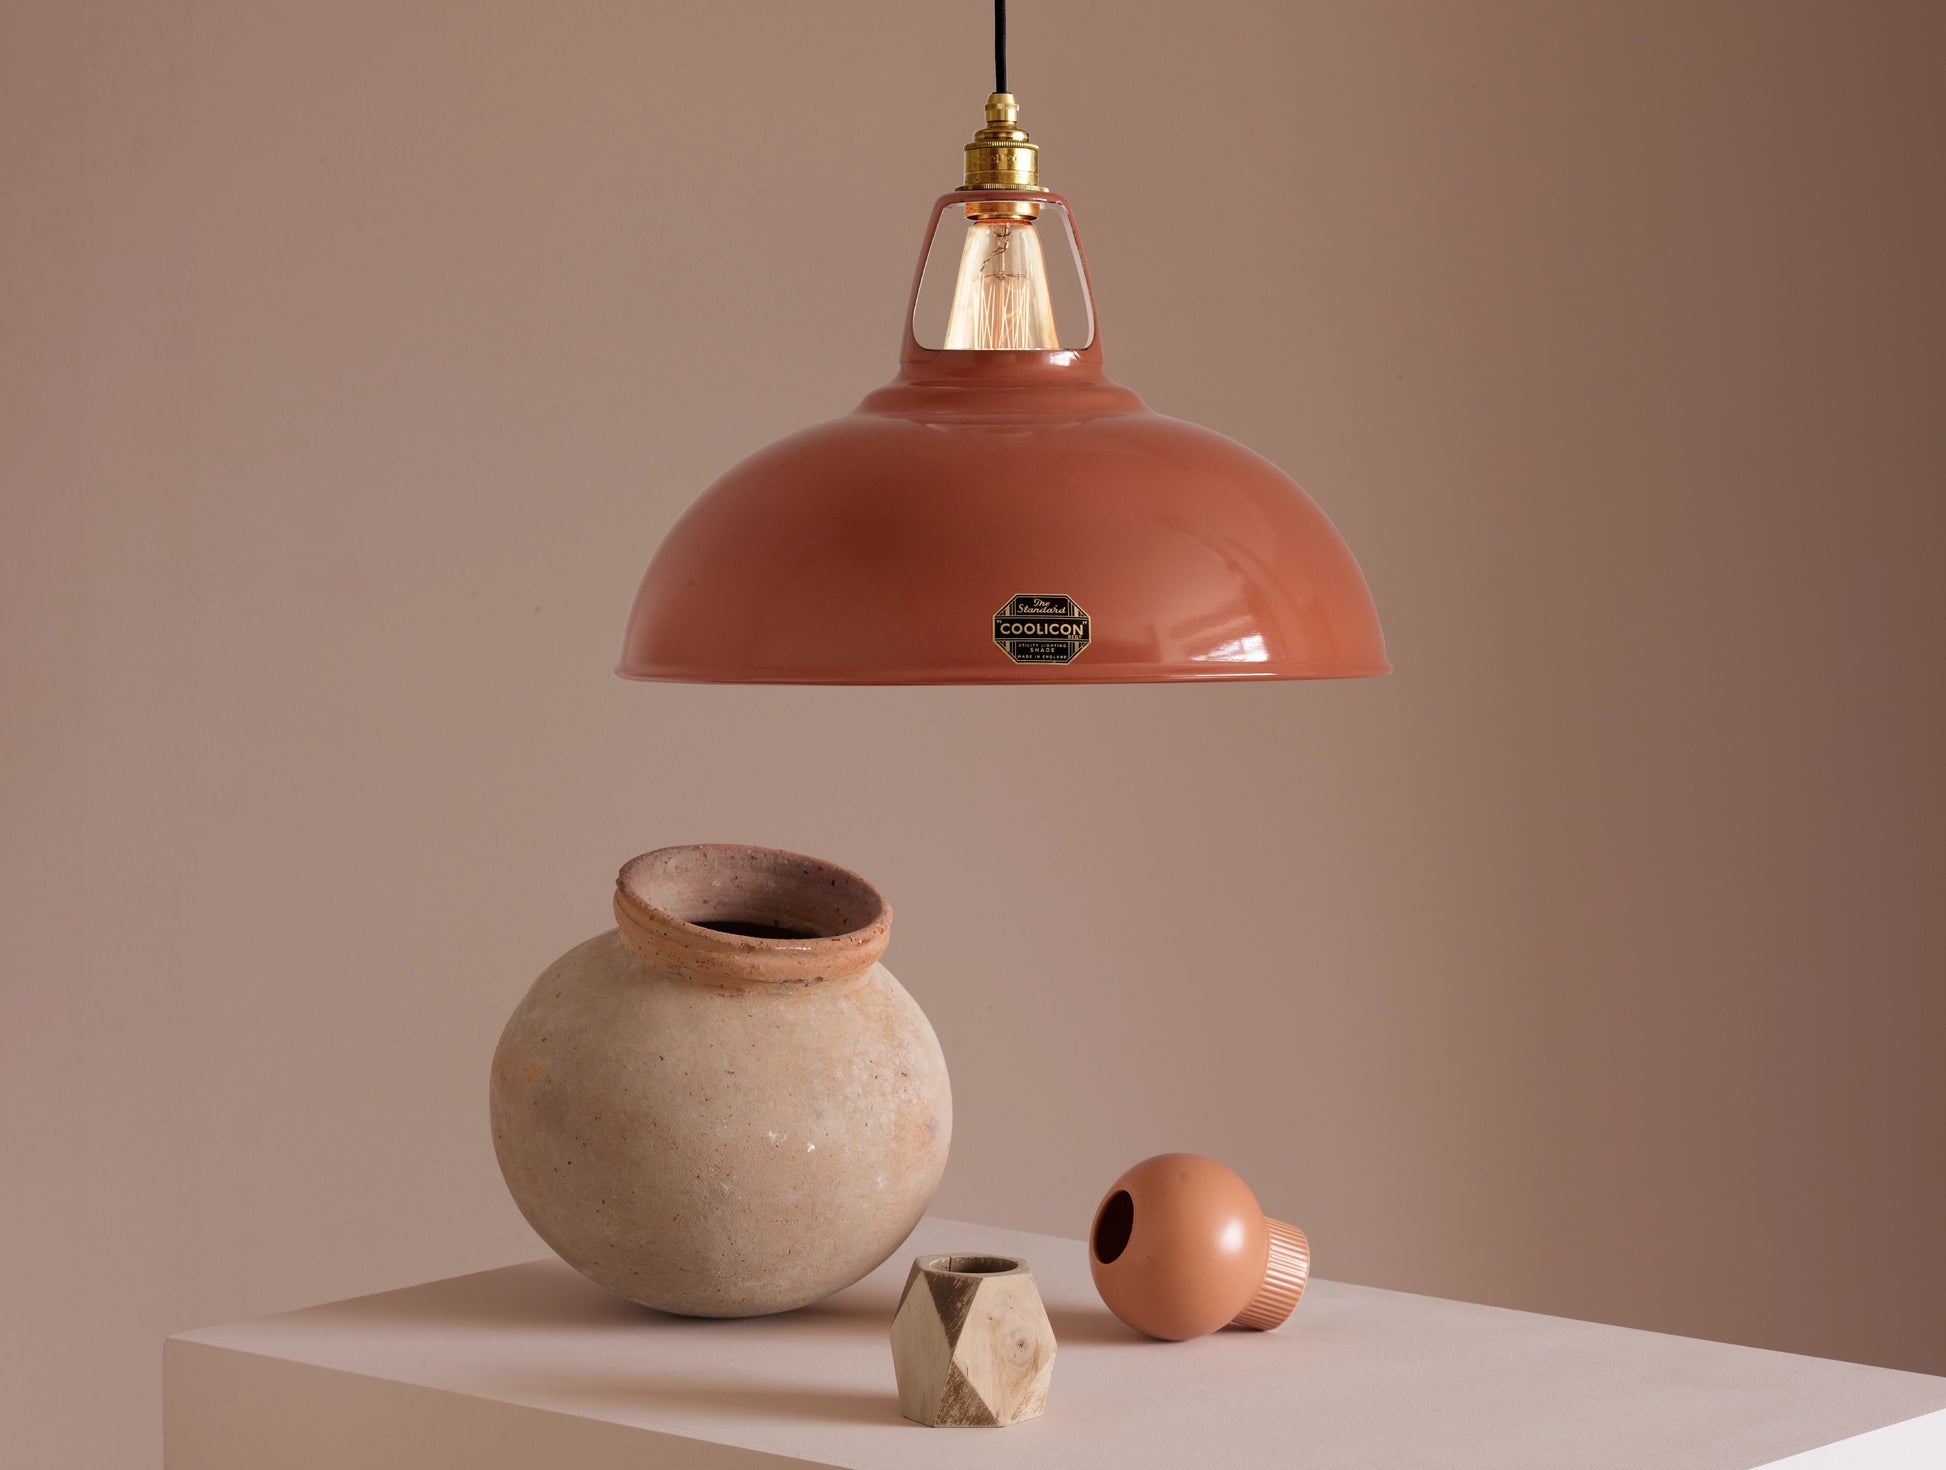 Large Terracotta Coolicon lampshade with a Porcelain pendant set over a light teal background